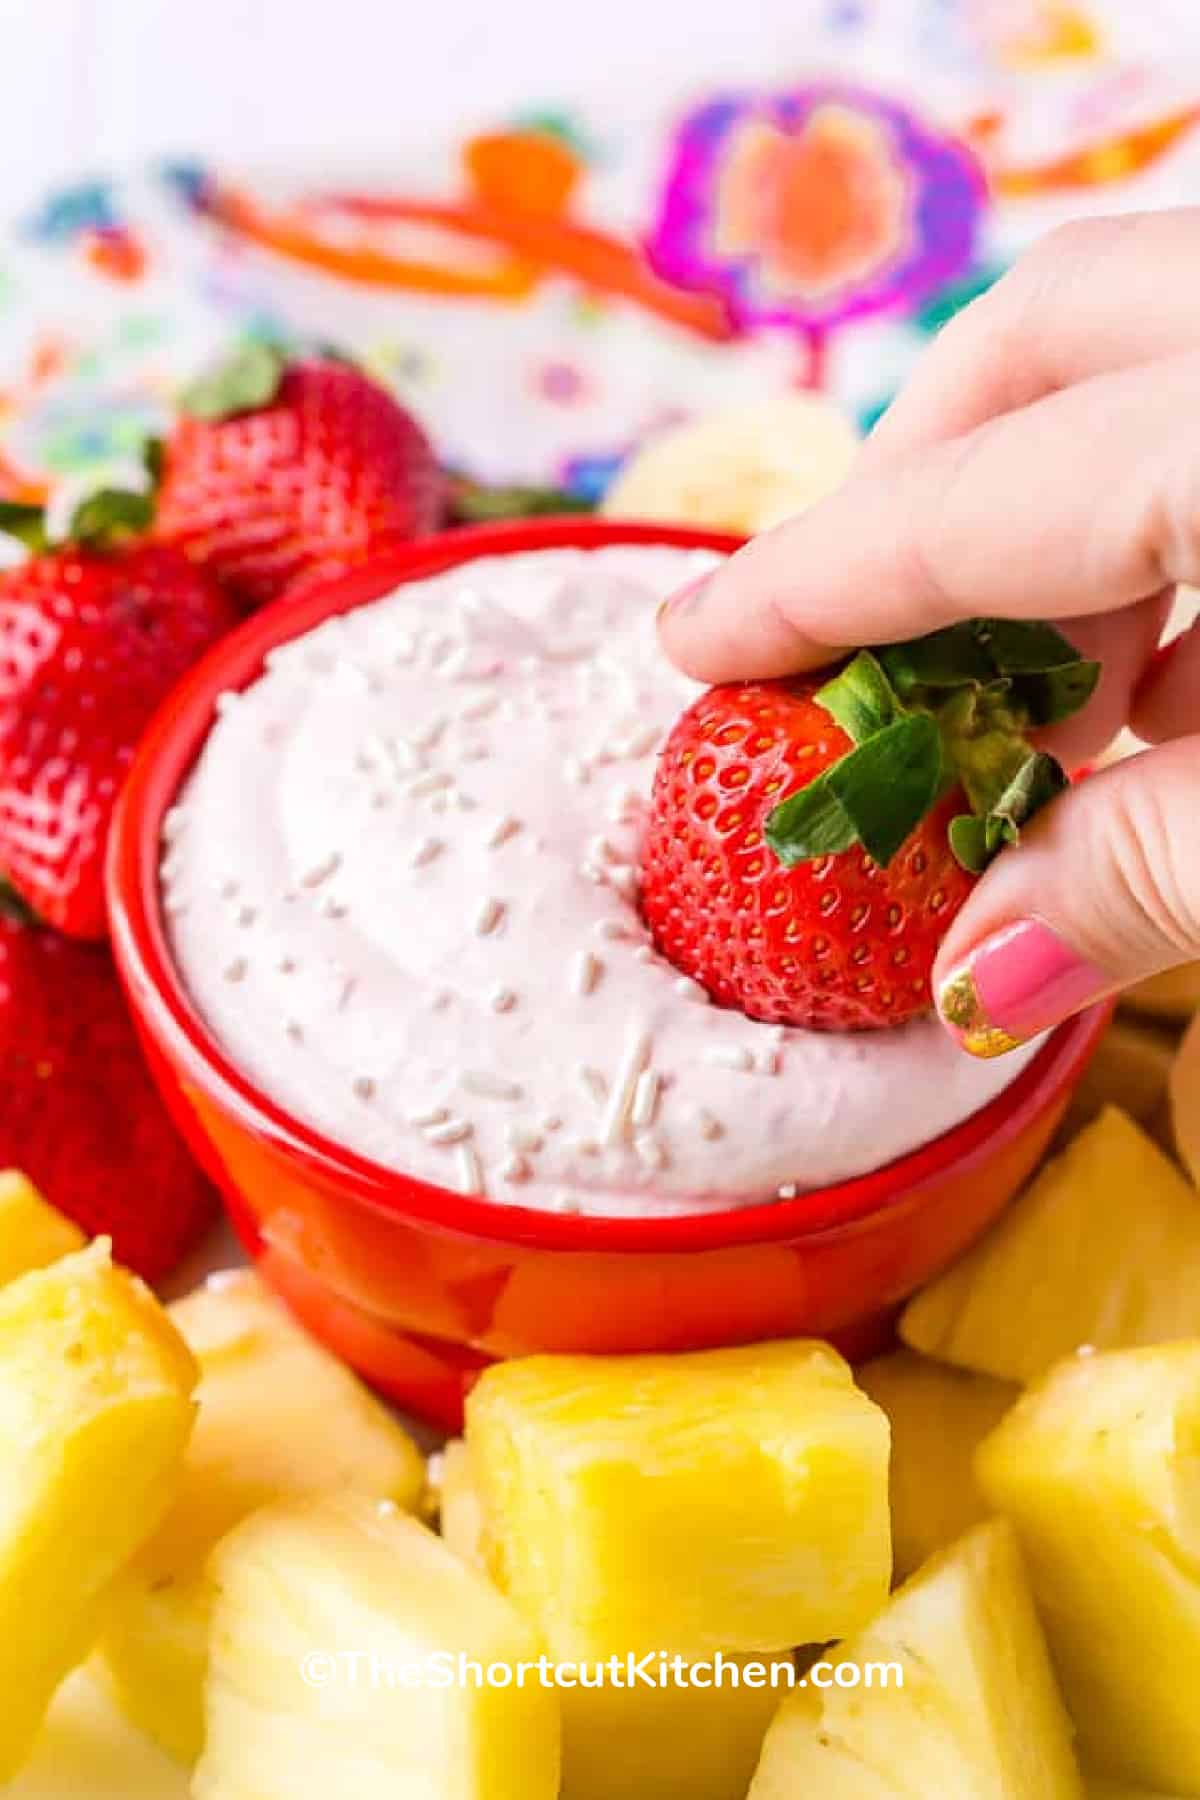 a strawberry being dipped into strawberry cream cheese fruit dip